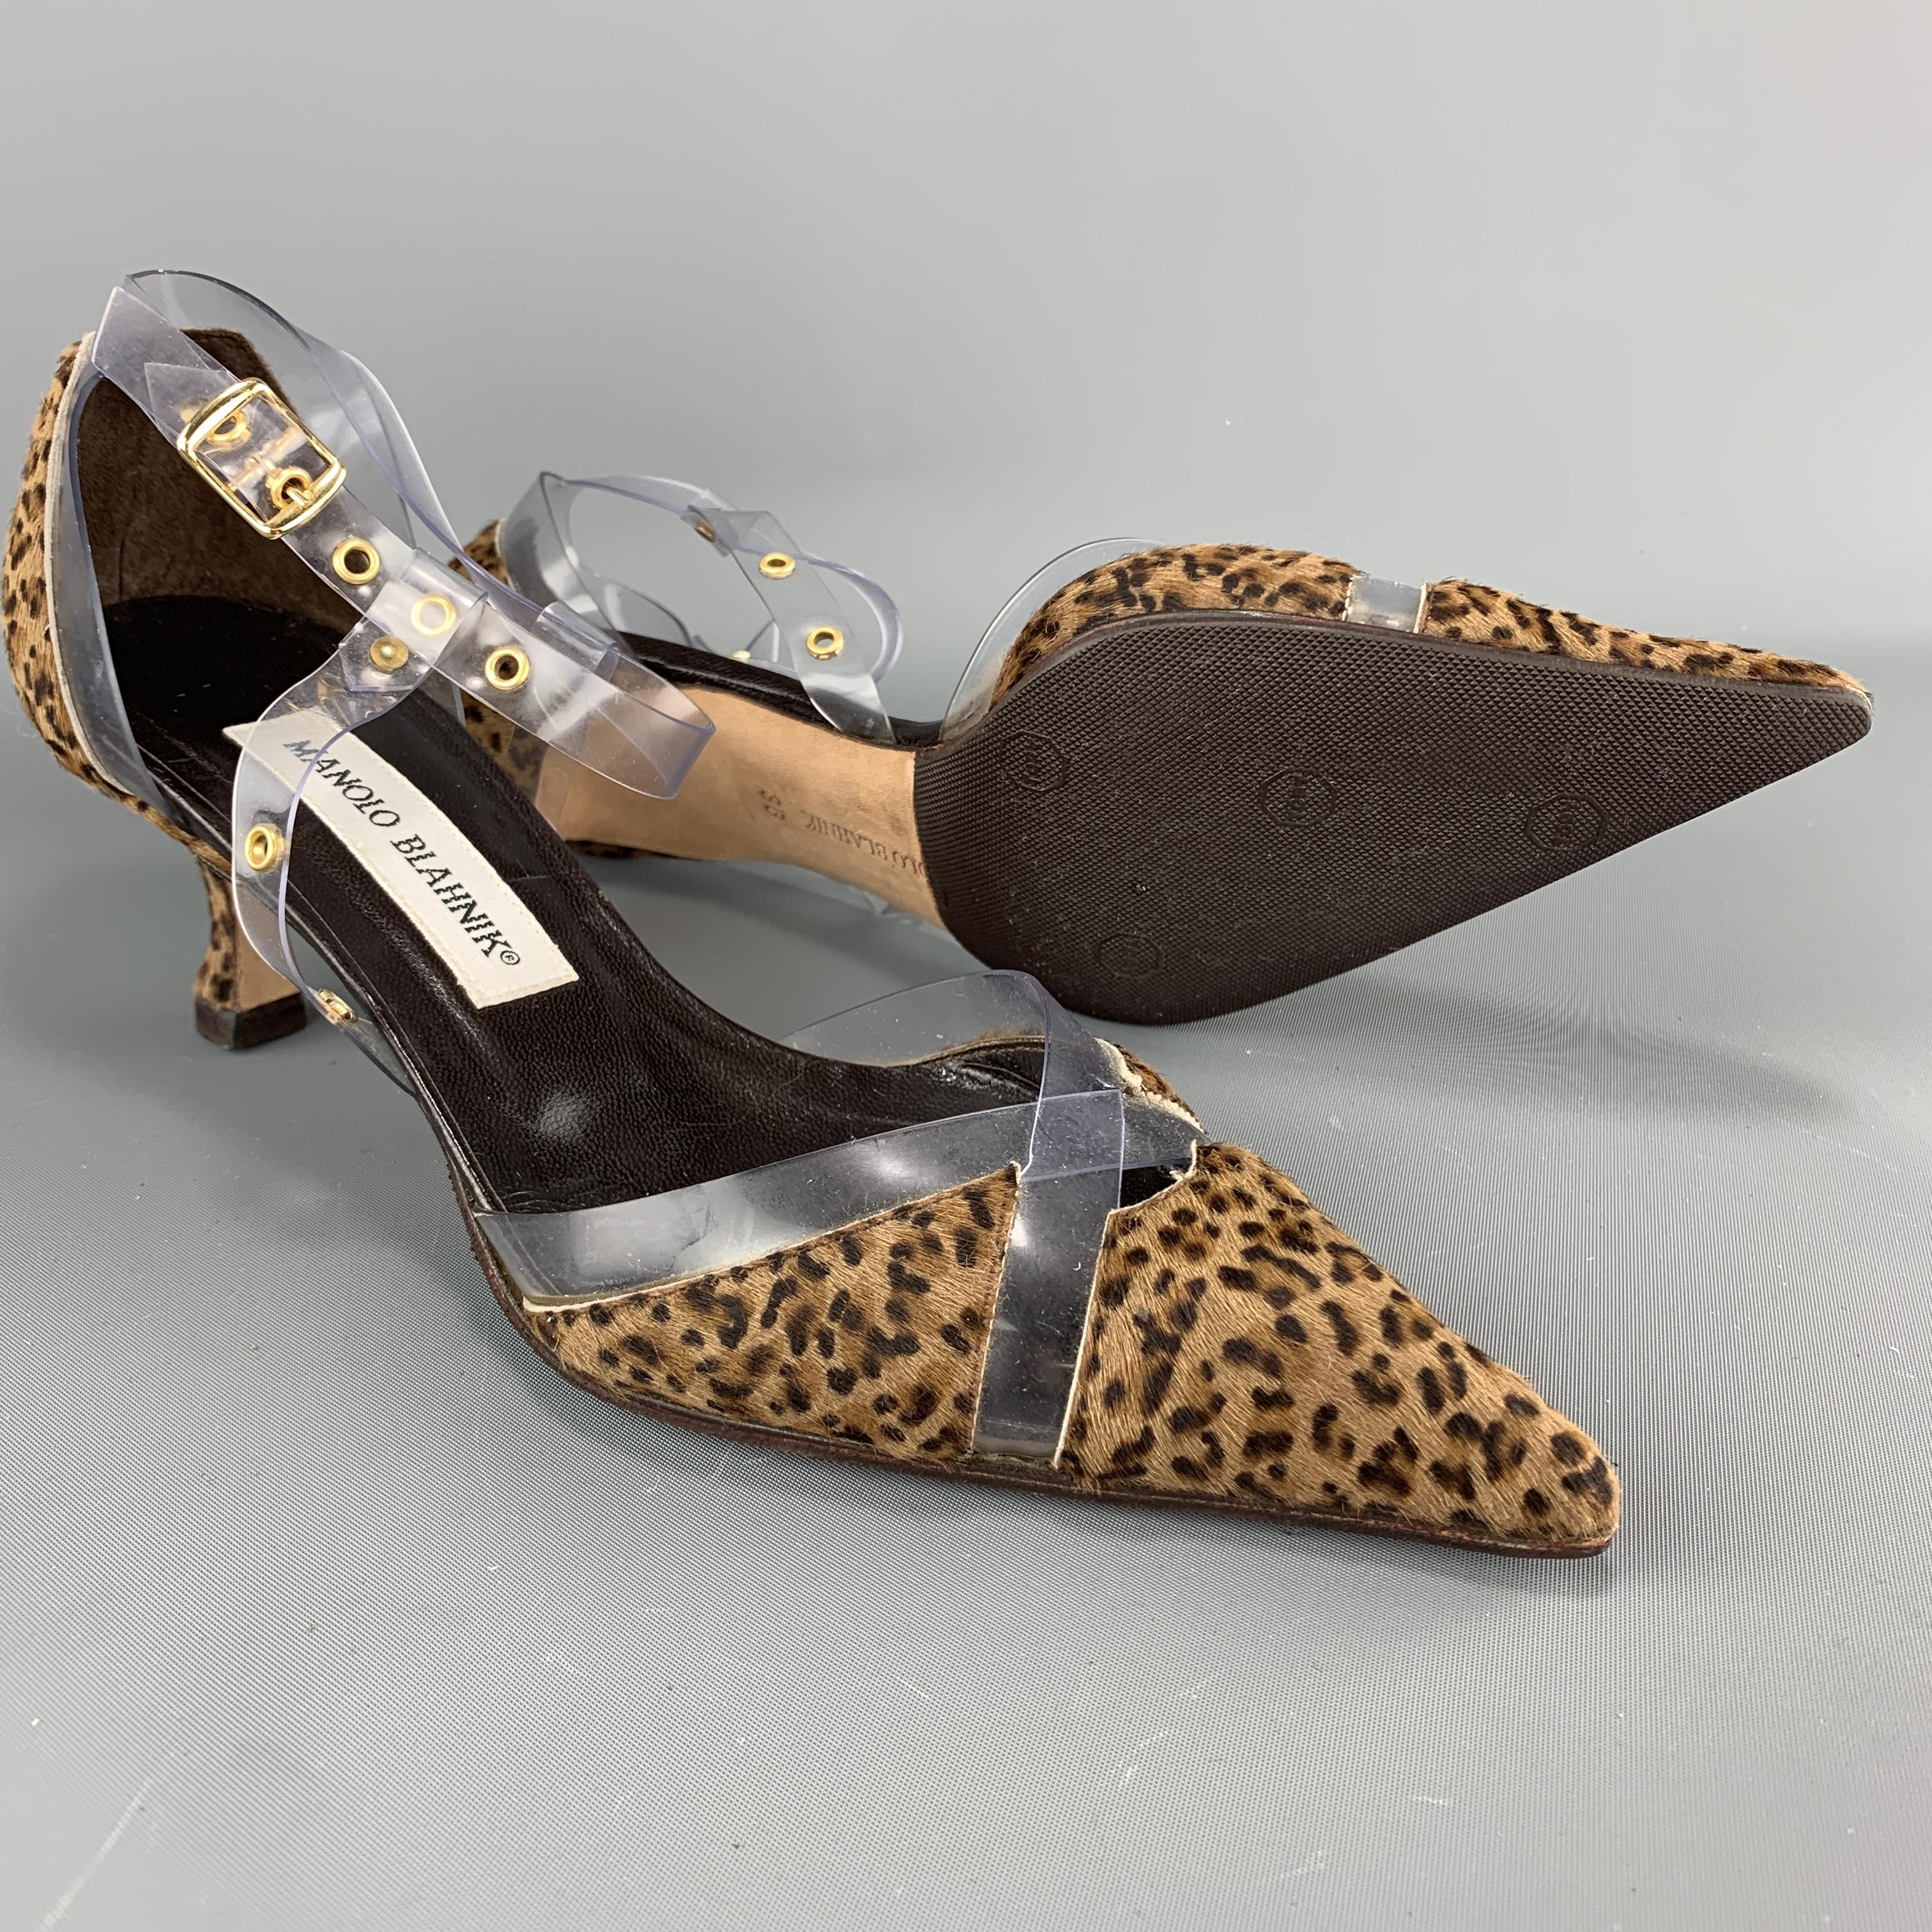 MANOLO BLAHNIK d'orsay pumps come in leopard print ponyhair leather with a covered kitten heel, pointed toe with X straps, and clear vinyl ankle harness.

Very Good Pre-Owned Condition.
Marked: IT 36

Heel: 2.25 in. 